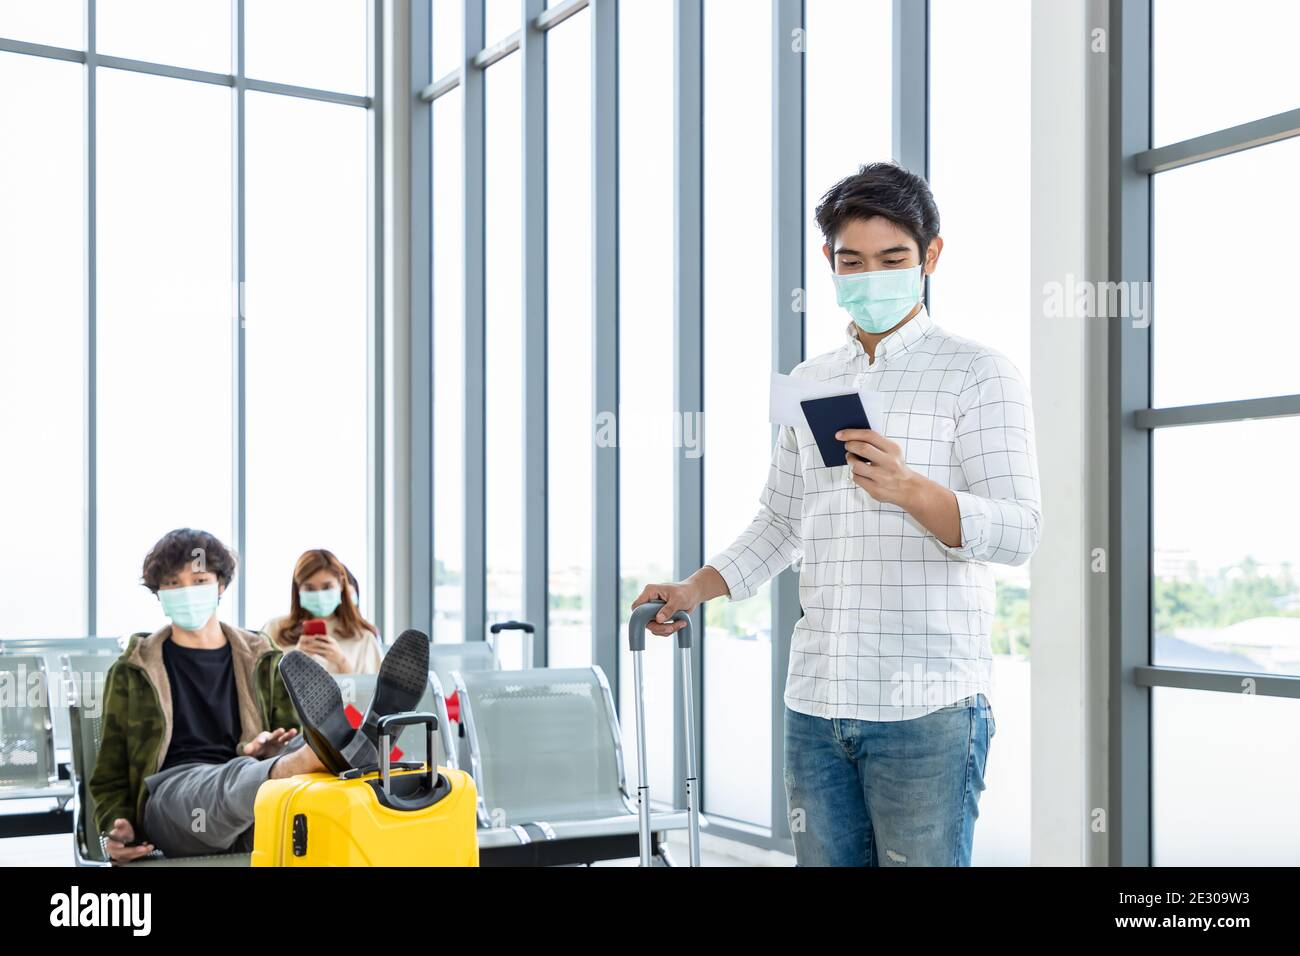 Traveler wearing protective mask in airport, during Covid-19 pandemic, with social distancing protocol. Checking passport and document to prepare to t Stock Photo